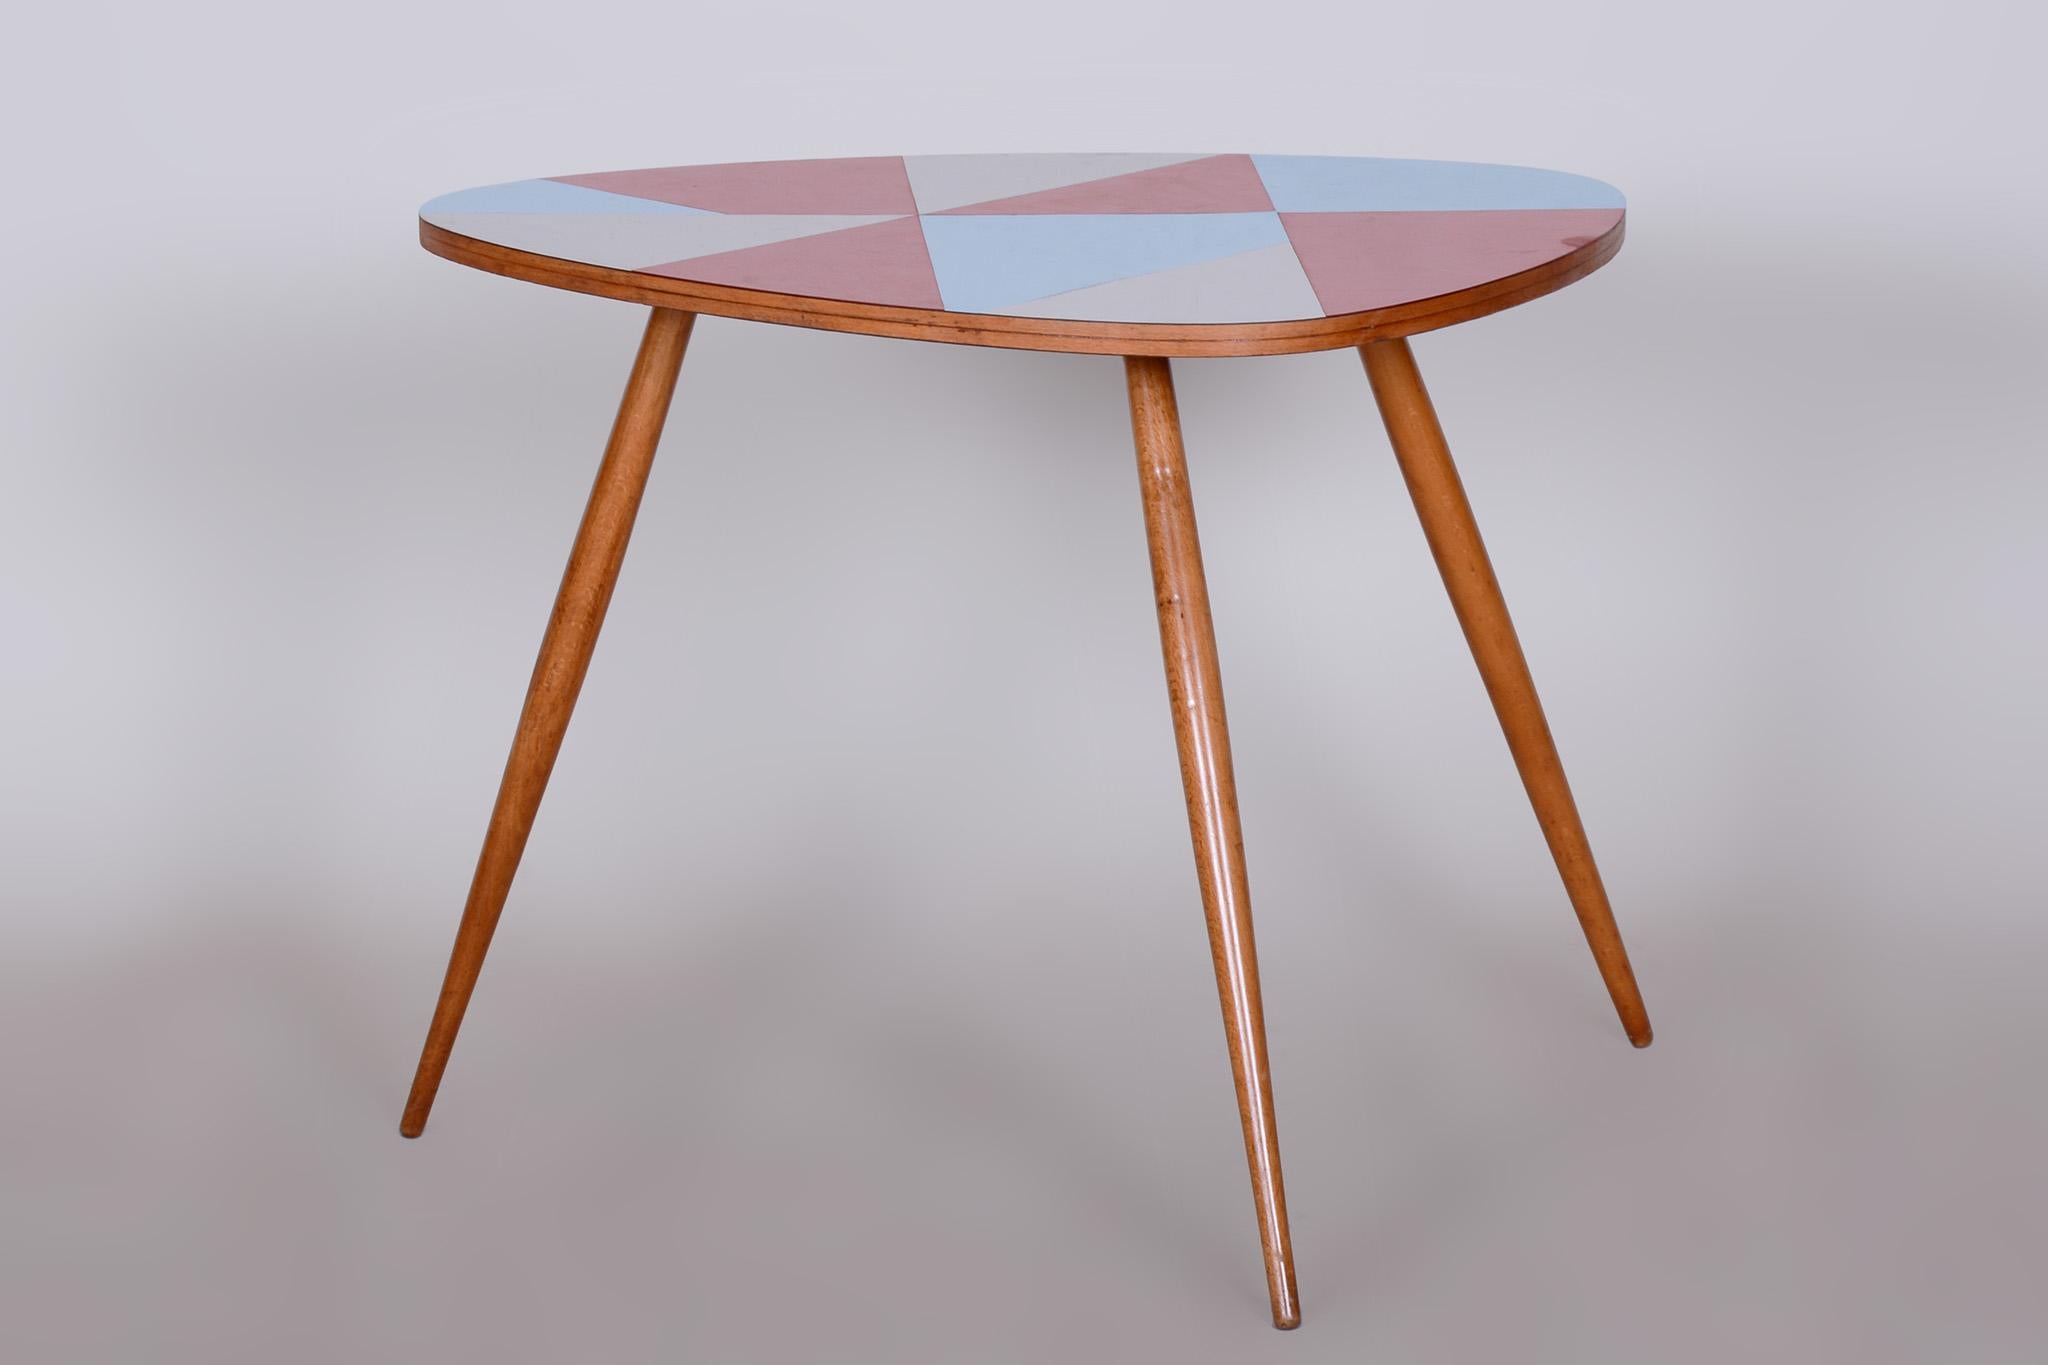 Small Restored midcentury Ttable.

Source: Czechia
Period: 1950-1959
Material: Beech and Umakart.